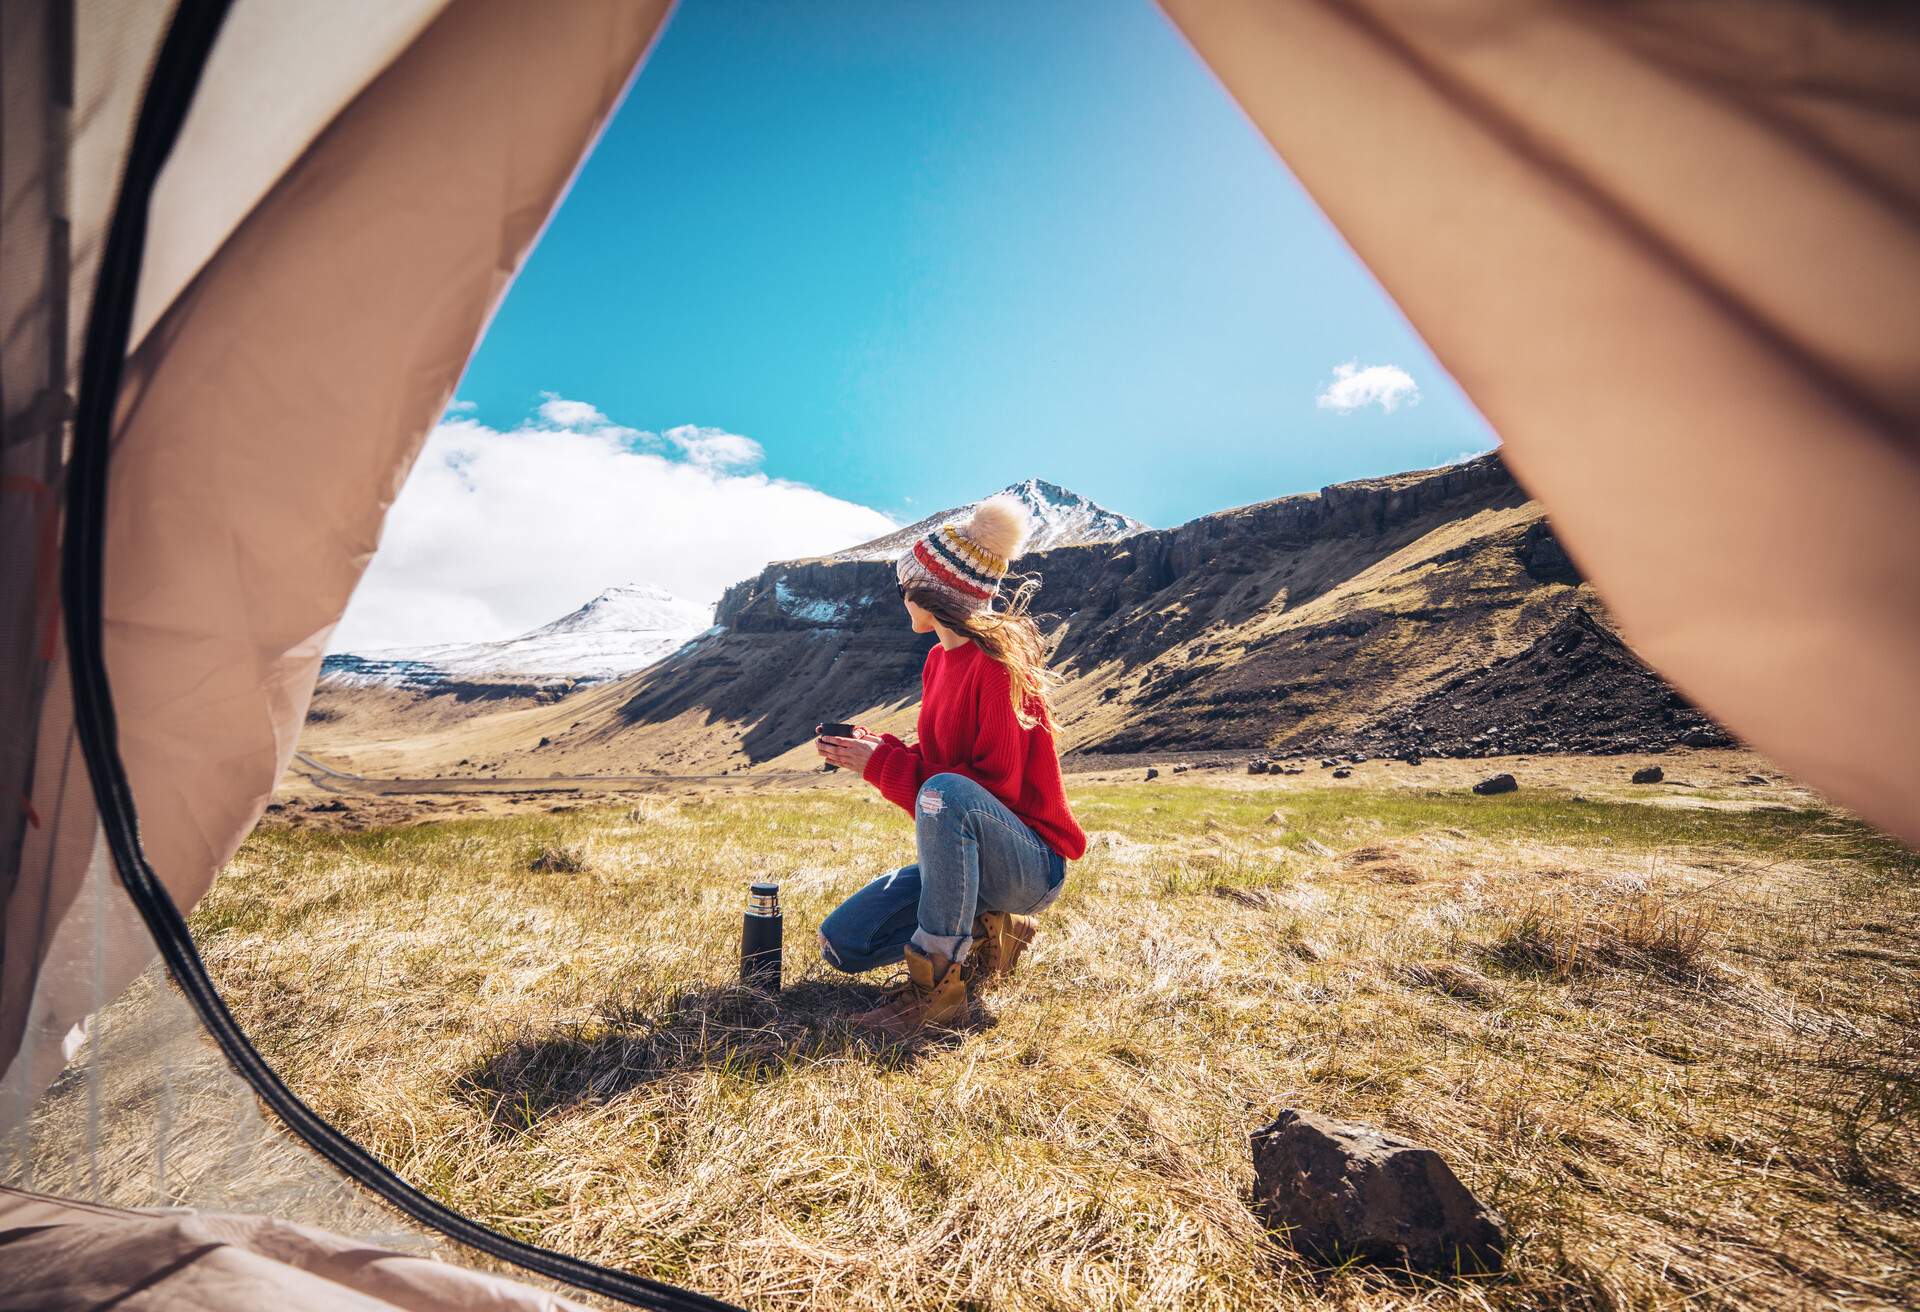 ICELAND_SNAEFELLSNESS_CAMPING_TENT_PEOPLE_WOMAN